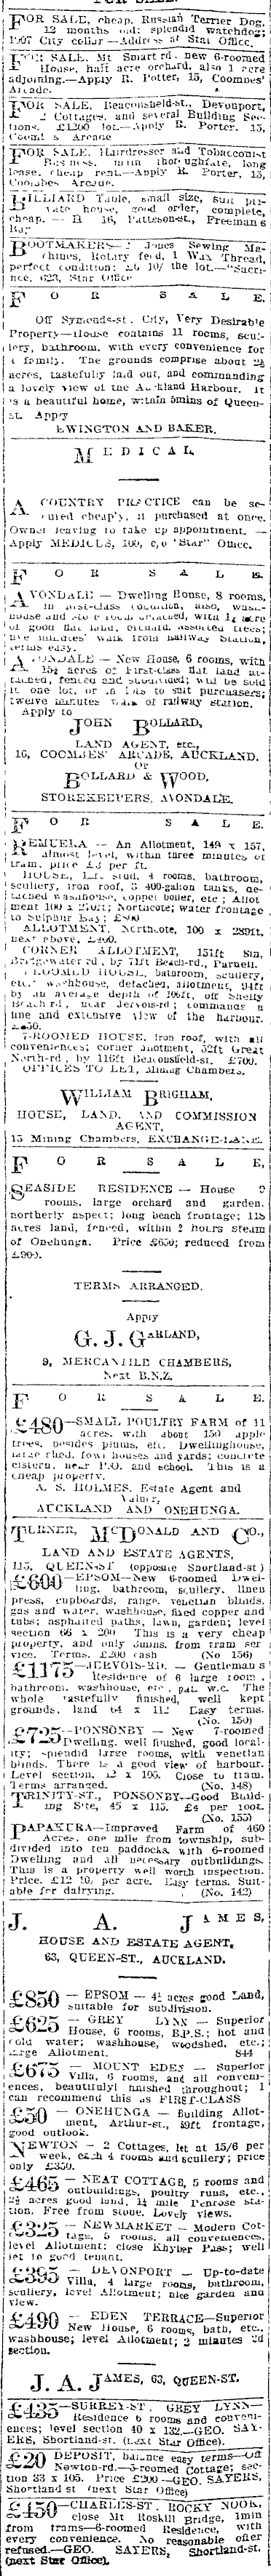 Papers Past Newspapers Auckland Star 8 June 1907 Page 2 Advertisements Column 2